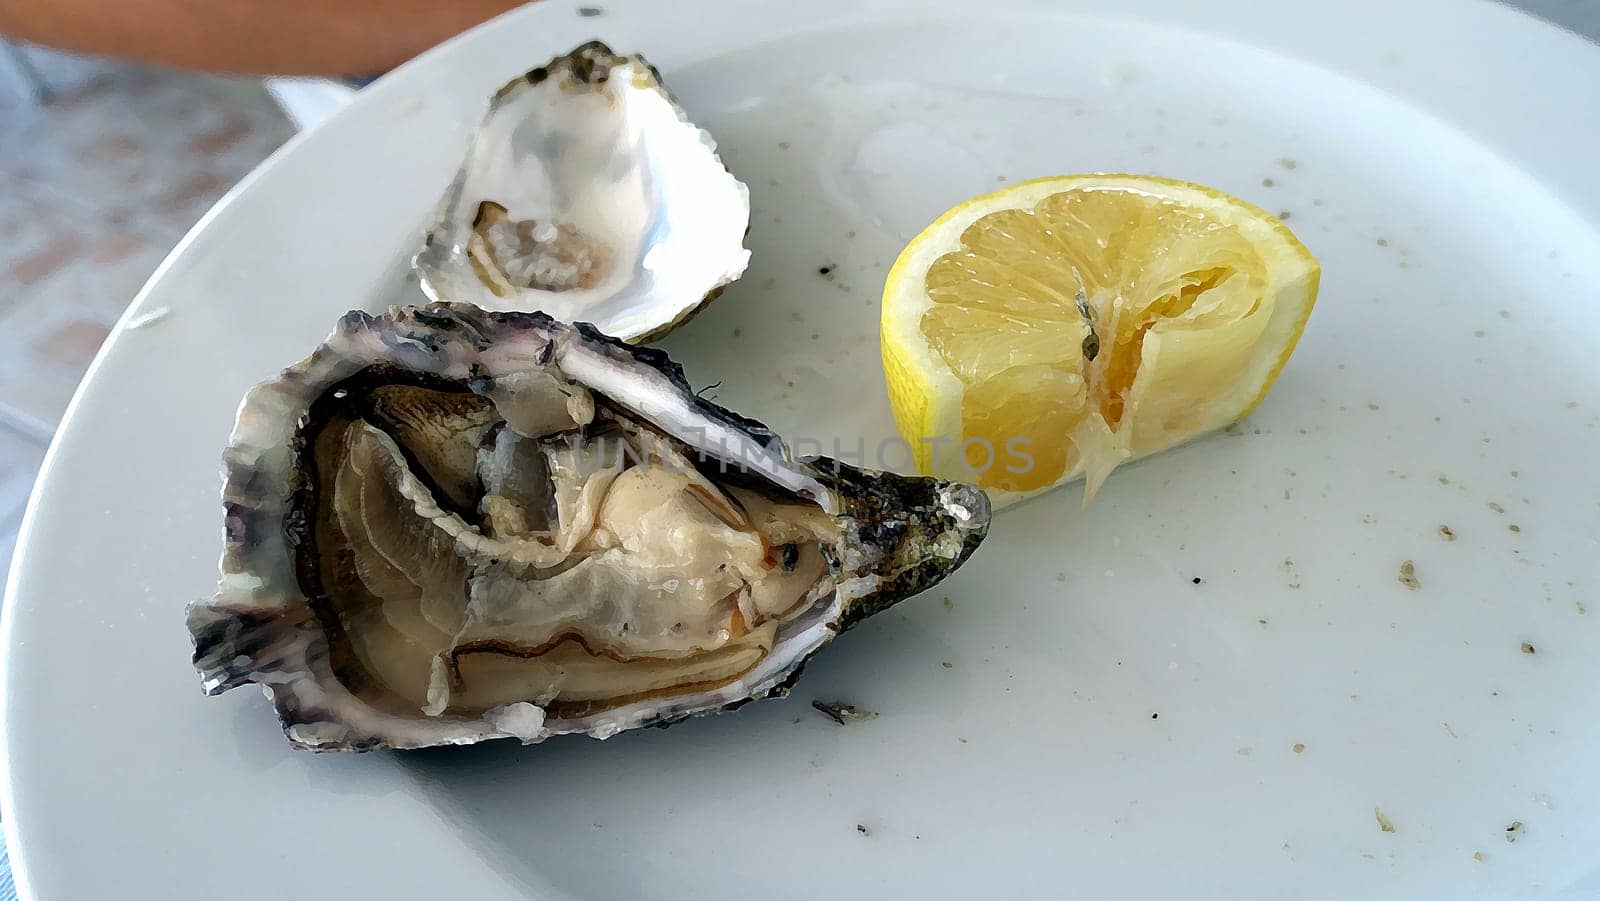 Two oysters, one empty and another full, on a plate with a slice of lemon.